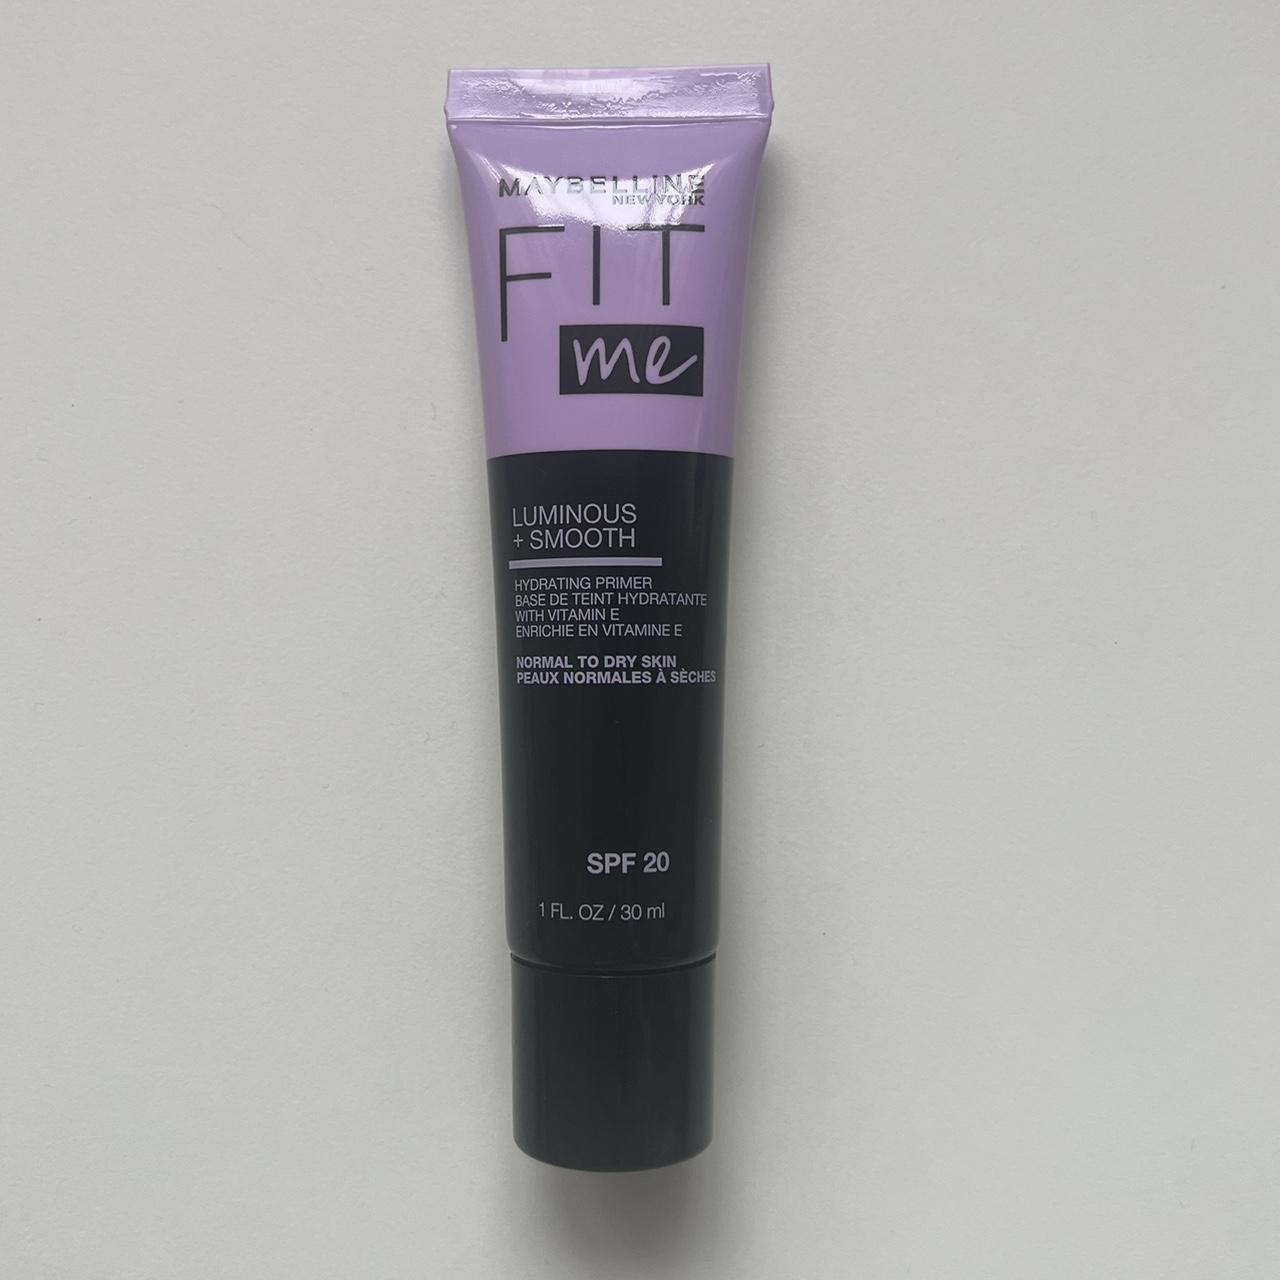 Maybelline Fit Me Primer Luminous and Smooth 30ml... - Depop